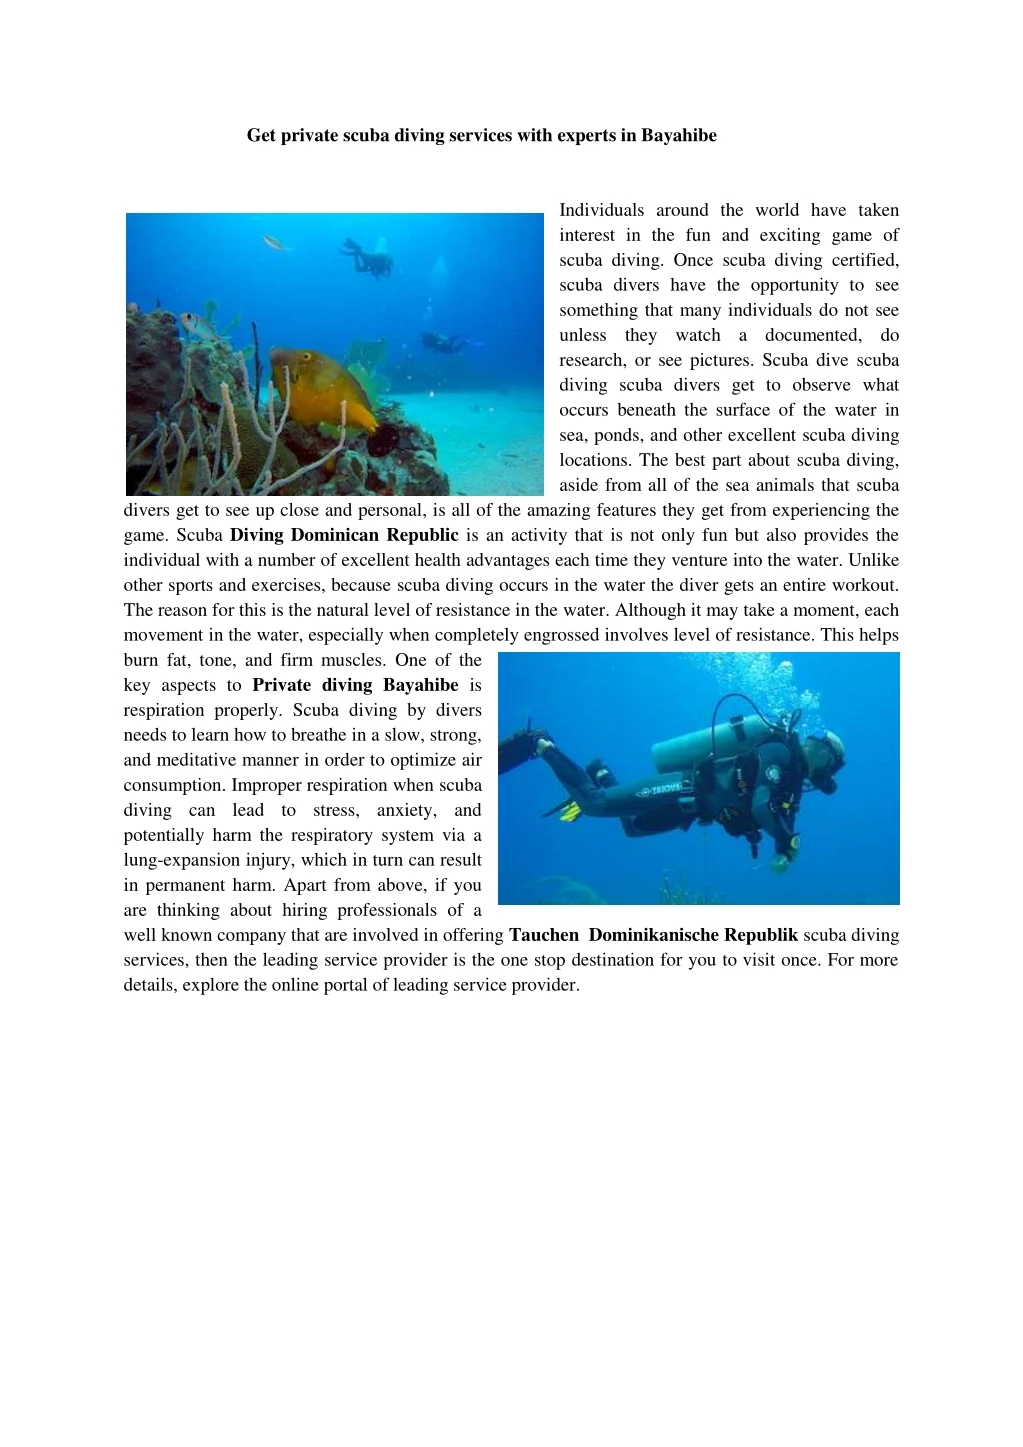 get private scuba diving services with experts